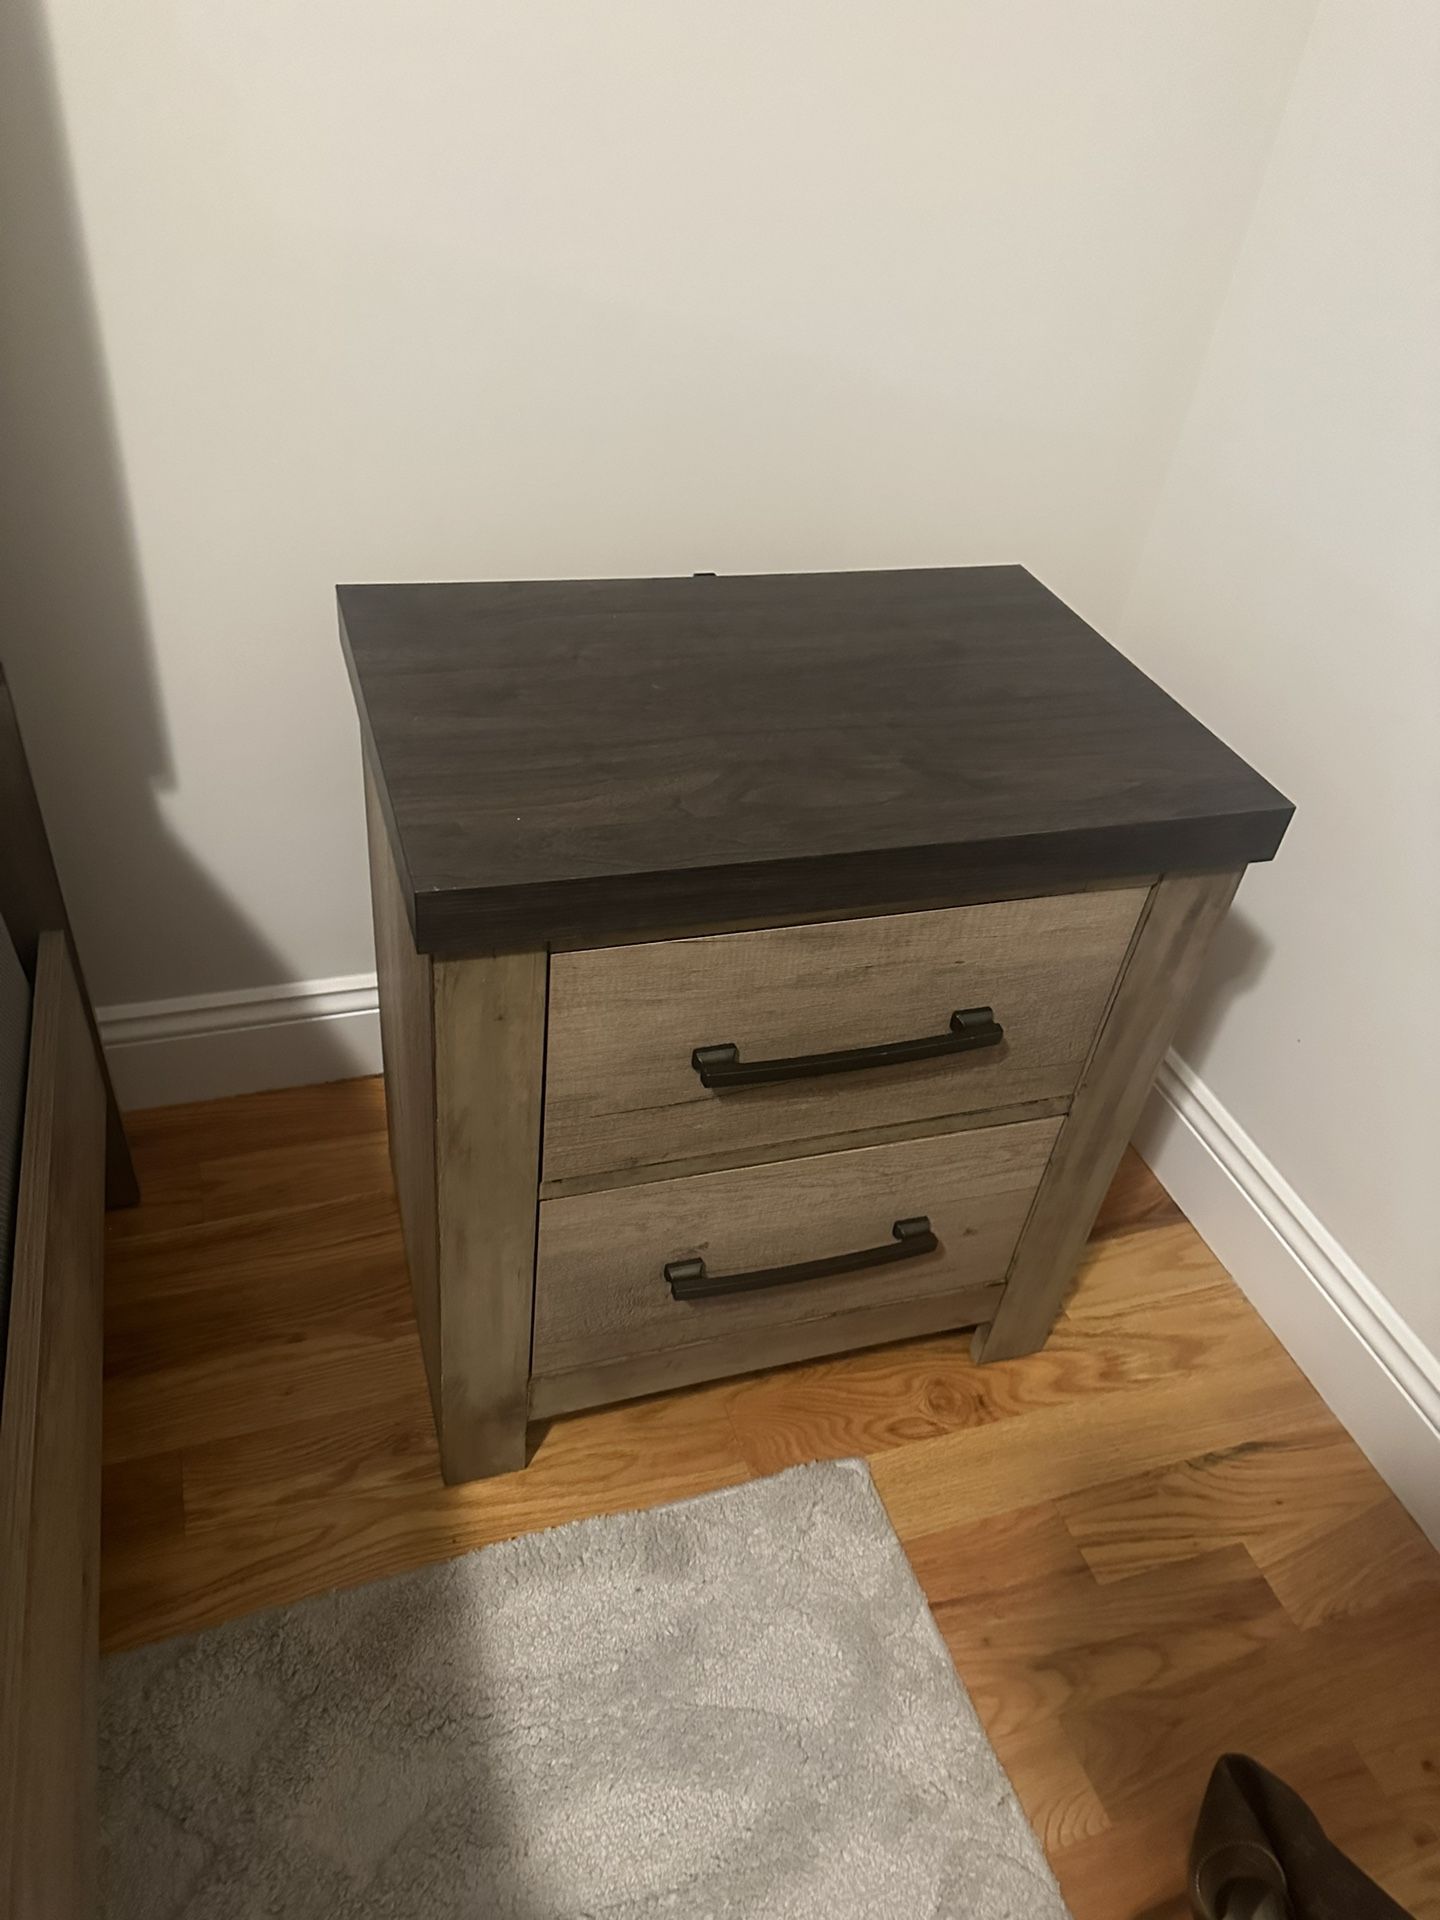 Two Matching Bedside Tables With Usb Plug